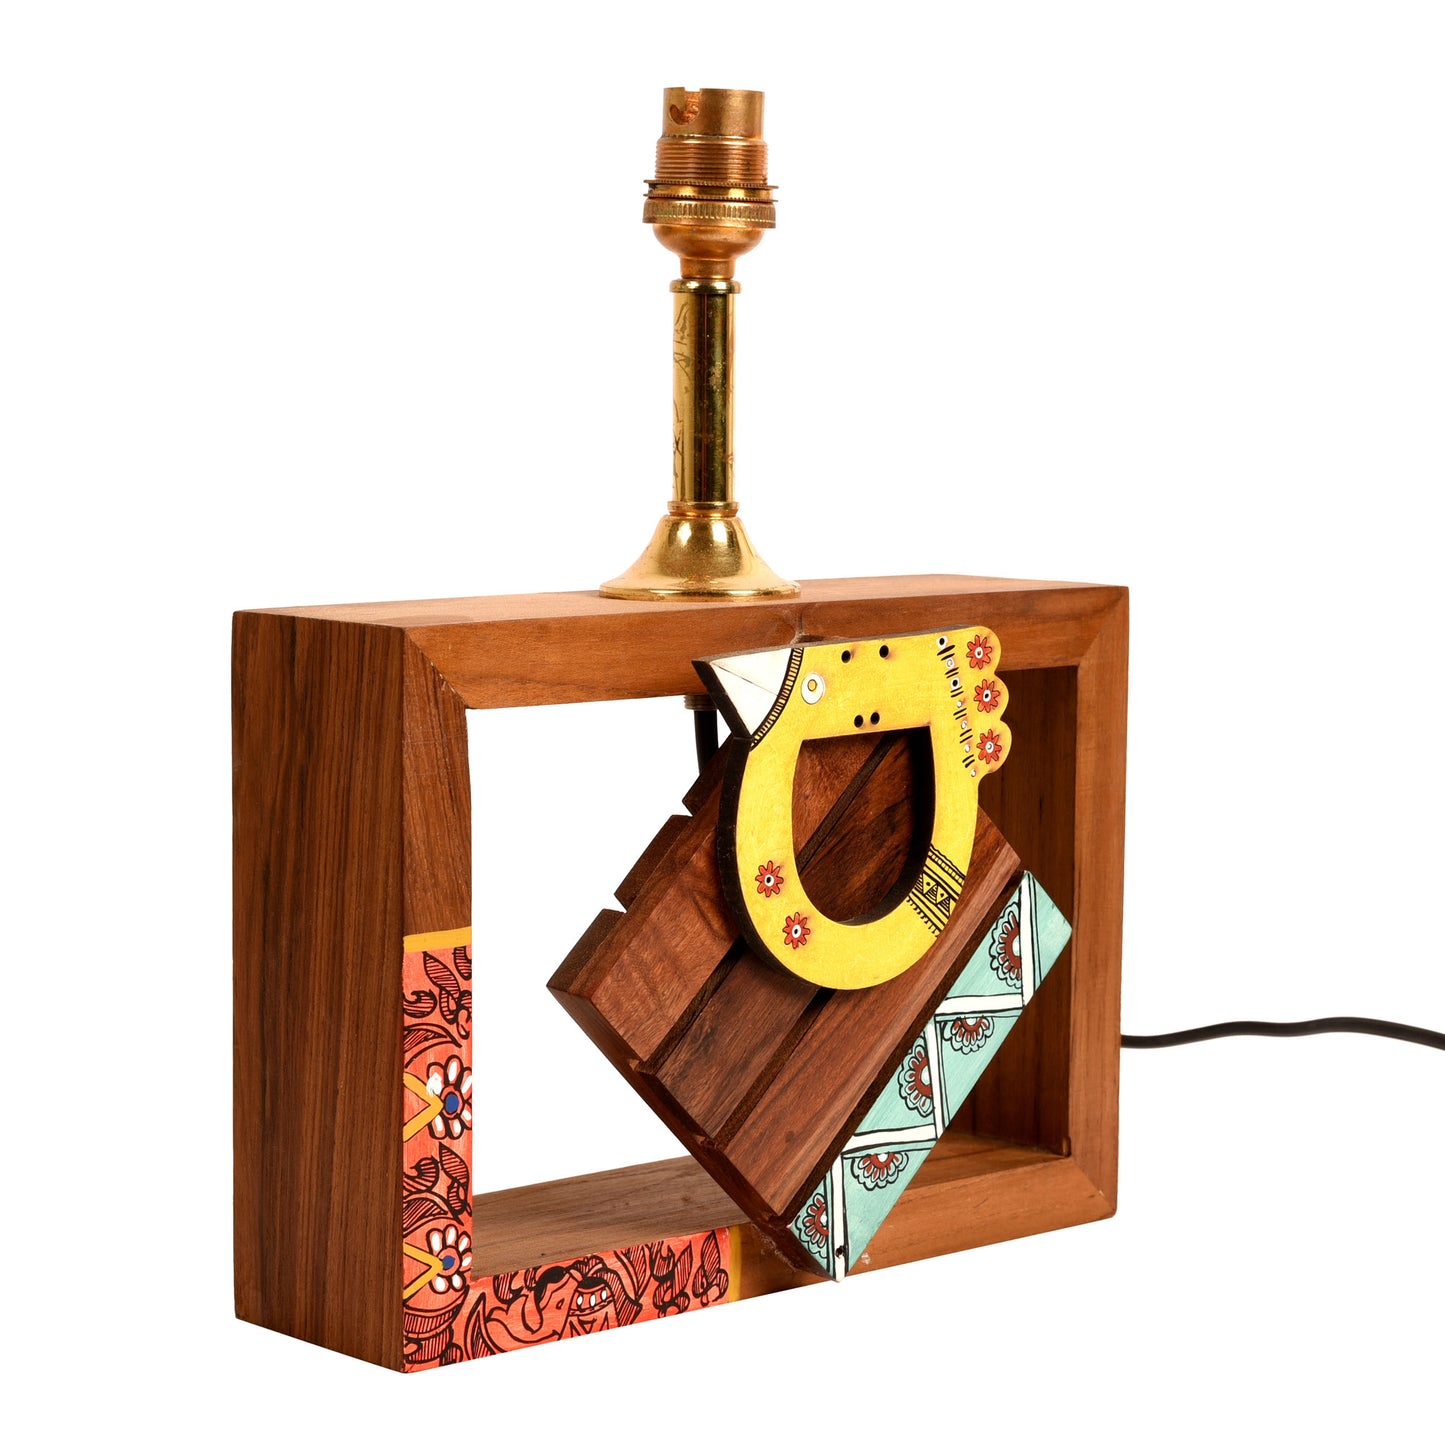 Table Lamp Handcrafted in Wood with Tribal Motifs and Bird with Red Shade (8x4x10.7")